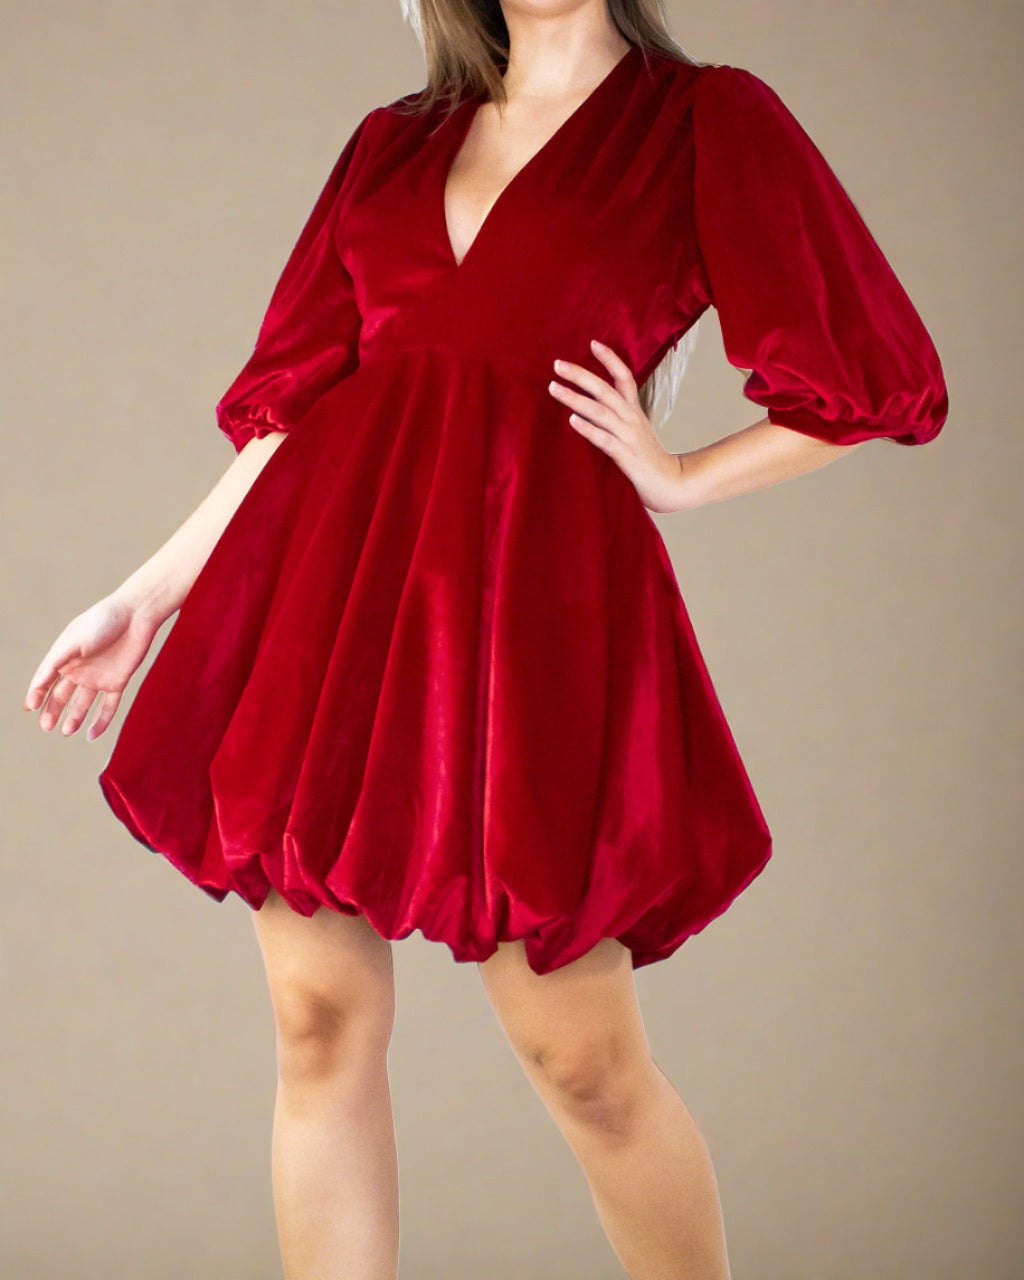 Clara Red Party Dress - Red Velvet Dress with Balloon Sleeves